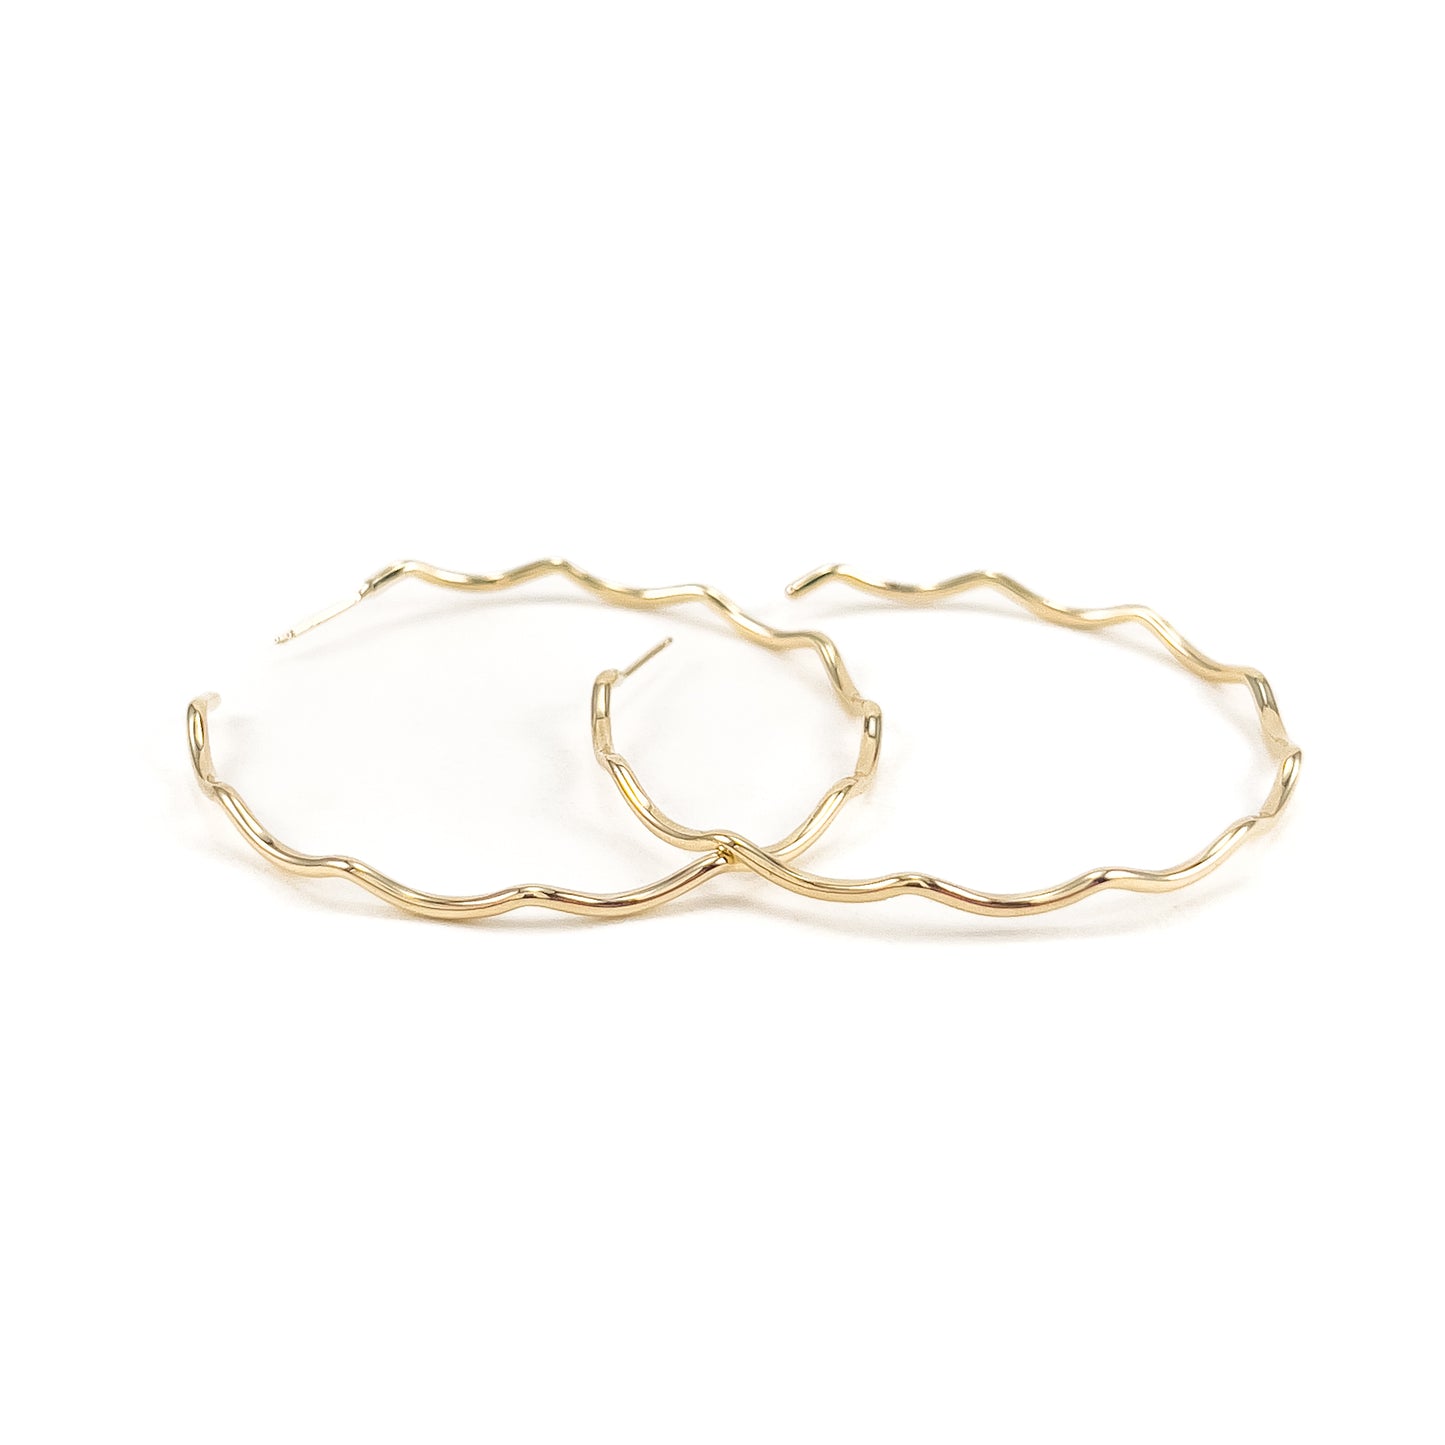 The Scallop Hoop in Gold